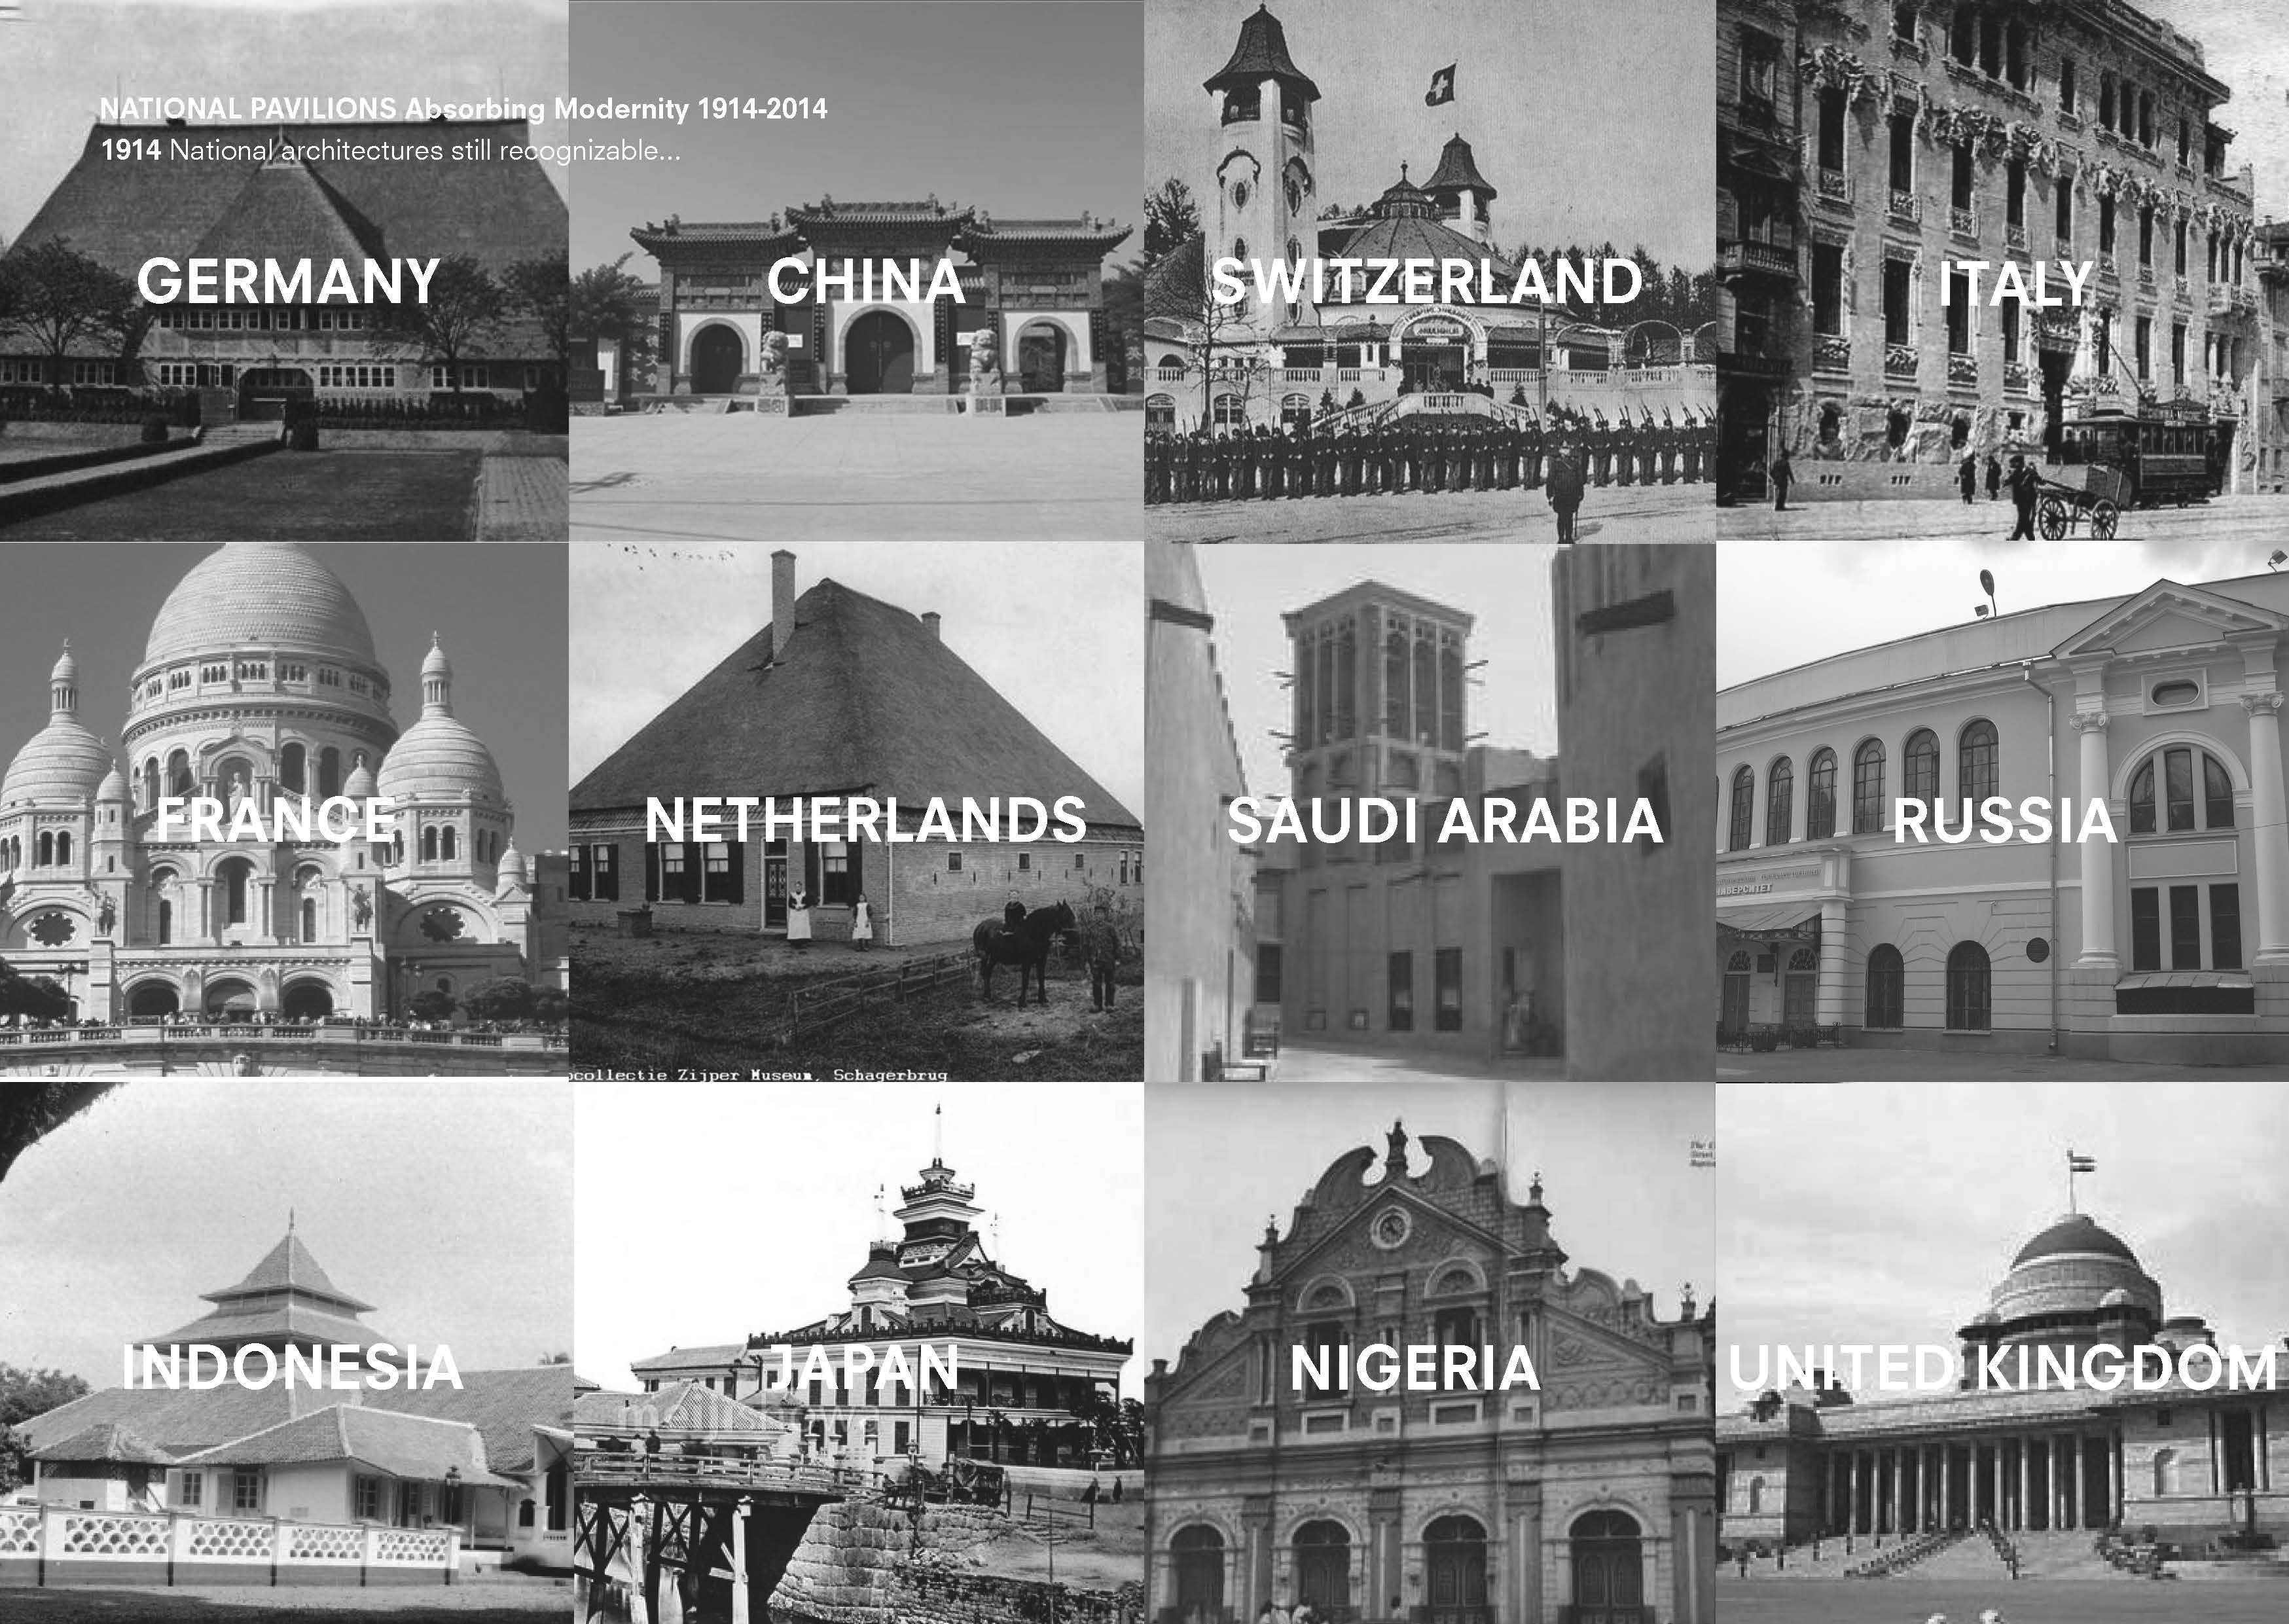 1914: National architectures still recognizable... (Click here for a large version)